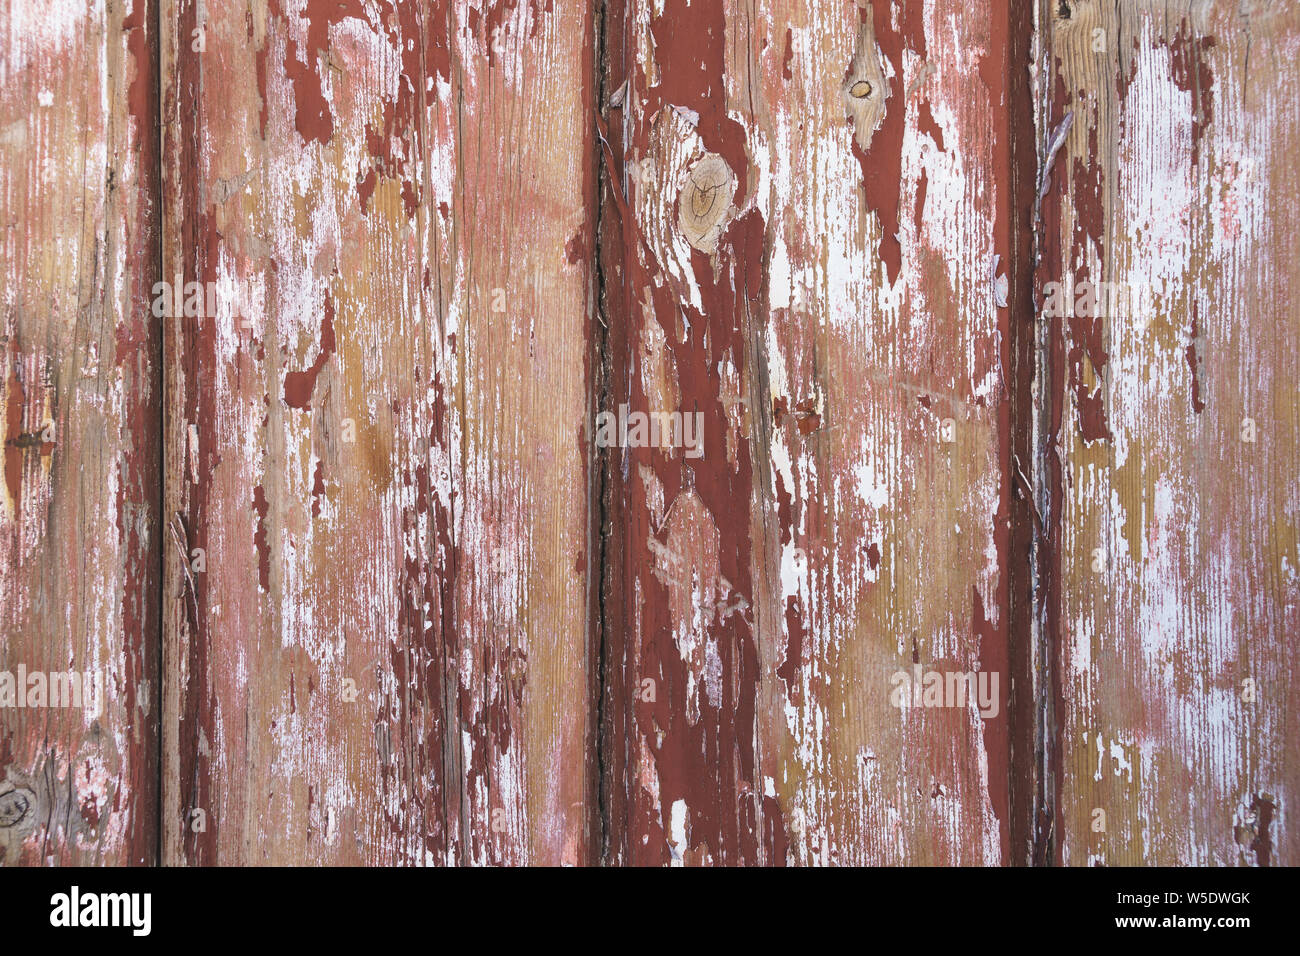 Weathered wooden planks with exfoliated reddish brown paint and wood grain shining through, shabby look (close-up, landscape horizontal format) Stock Photo